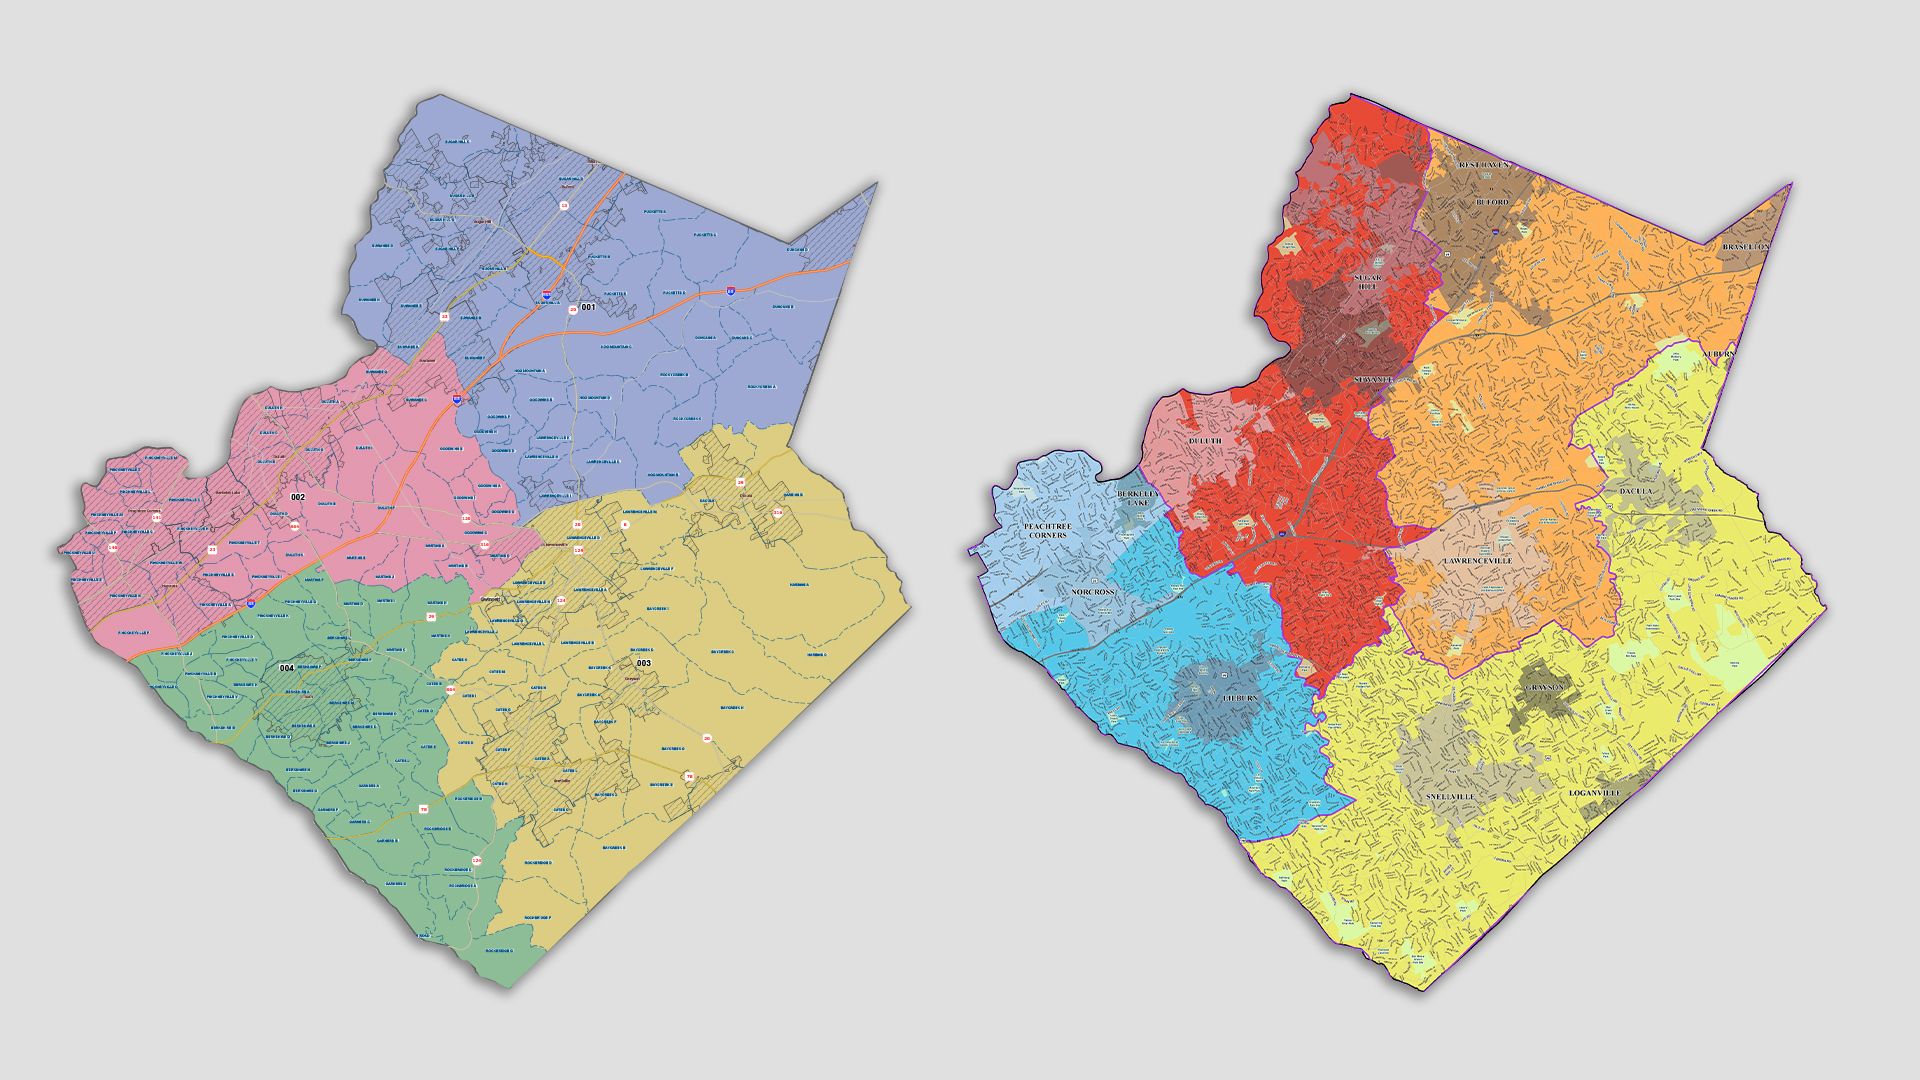 Two maps of Gwinnett county's district lines